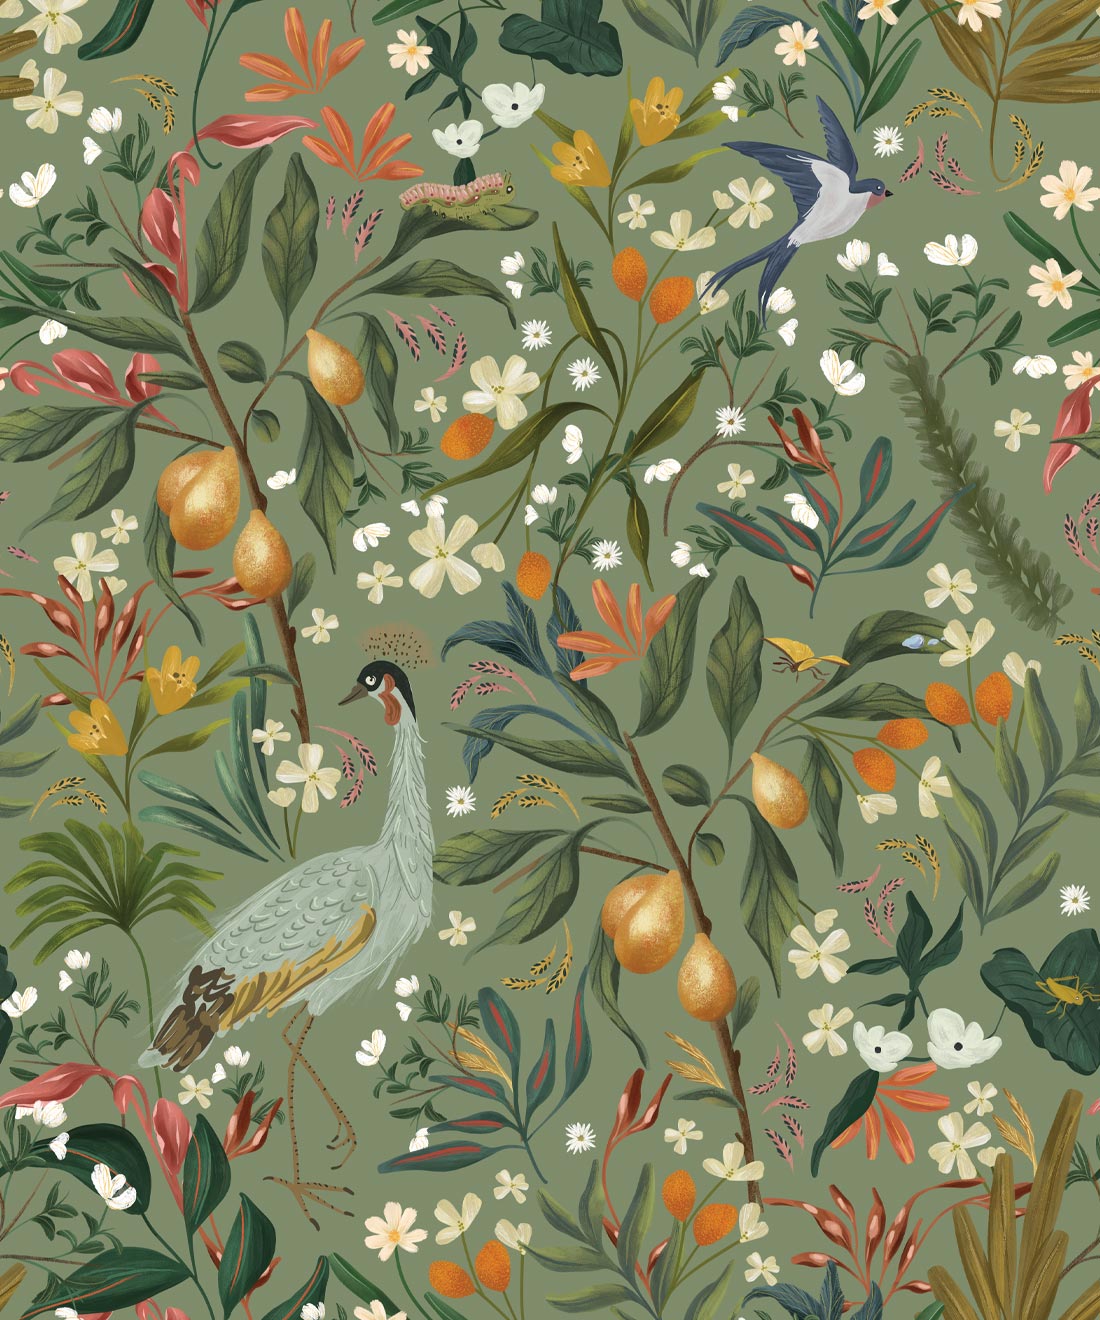 Tropical Birds Fabric, Wallpaper and Home Decor | Spoonflower